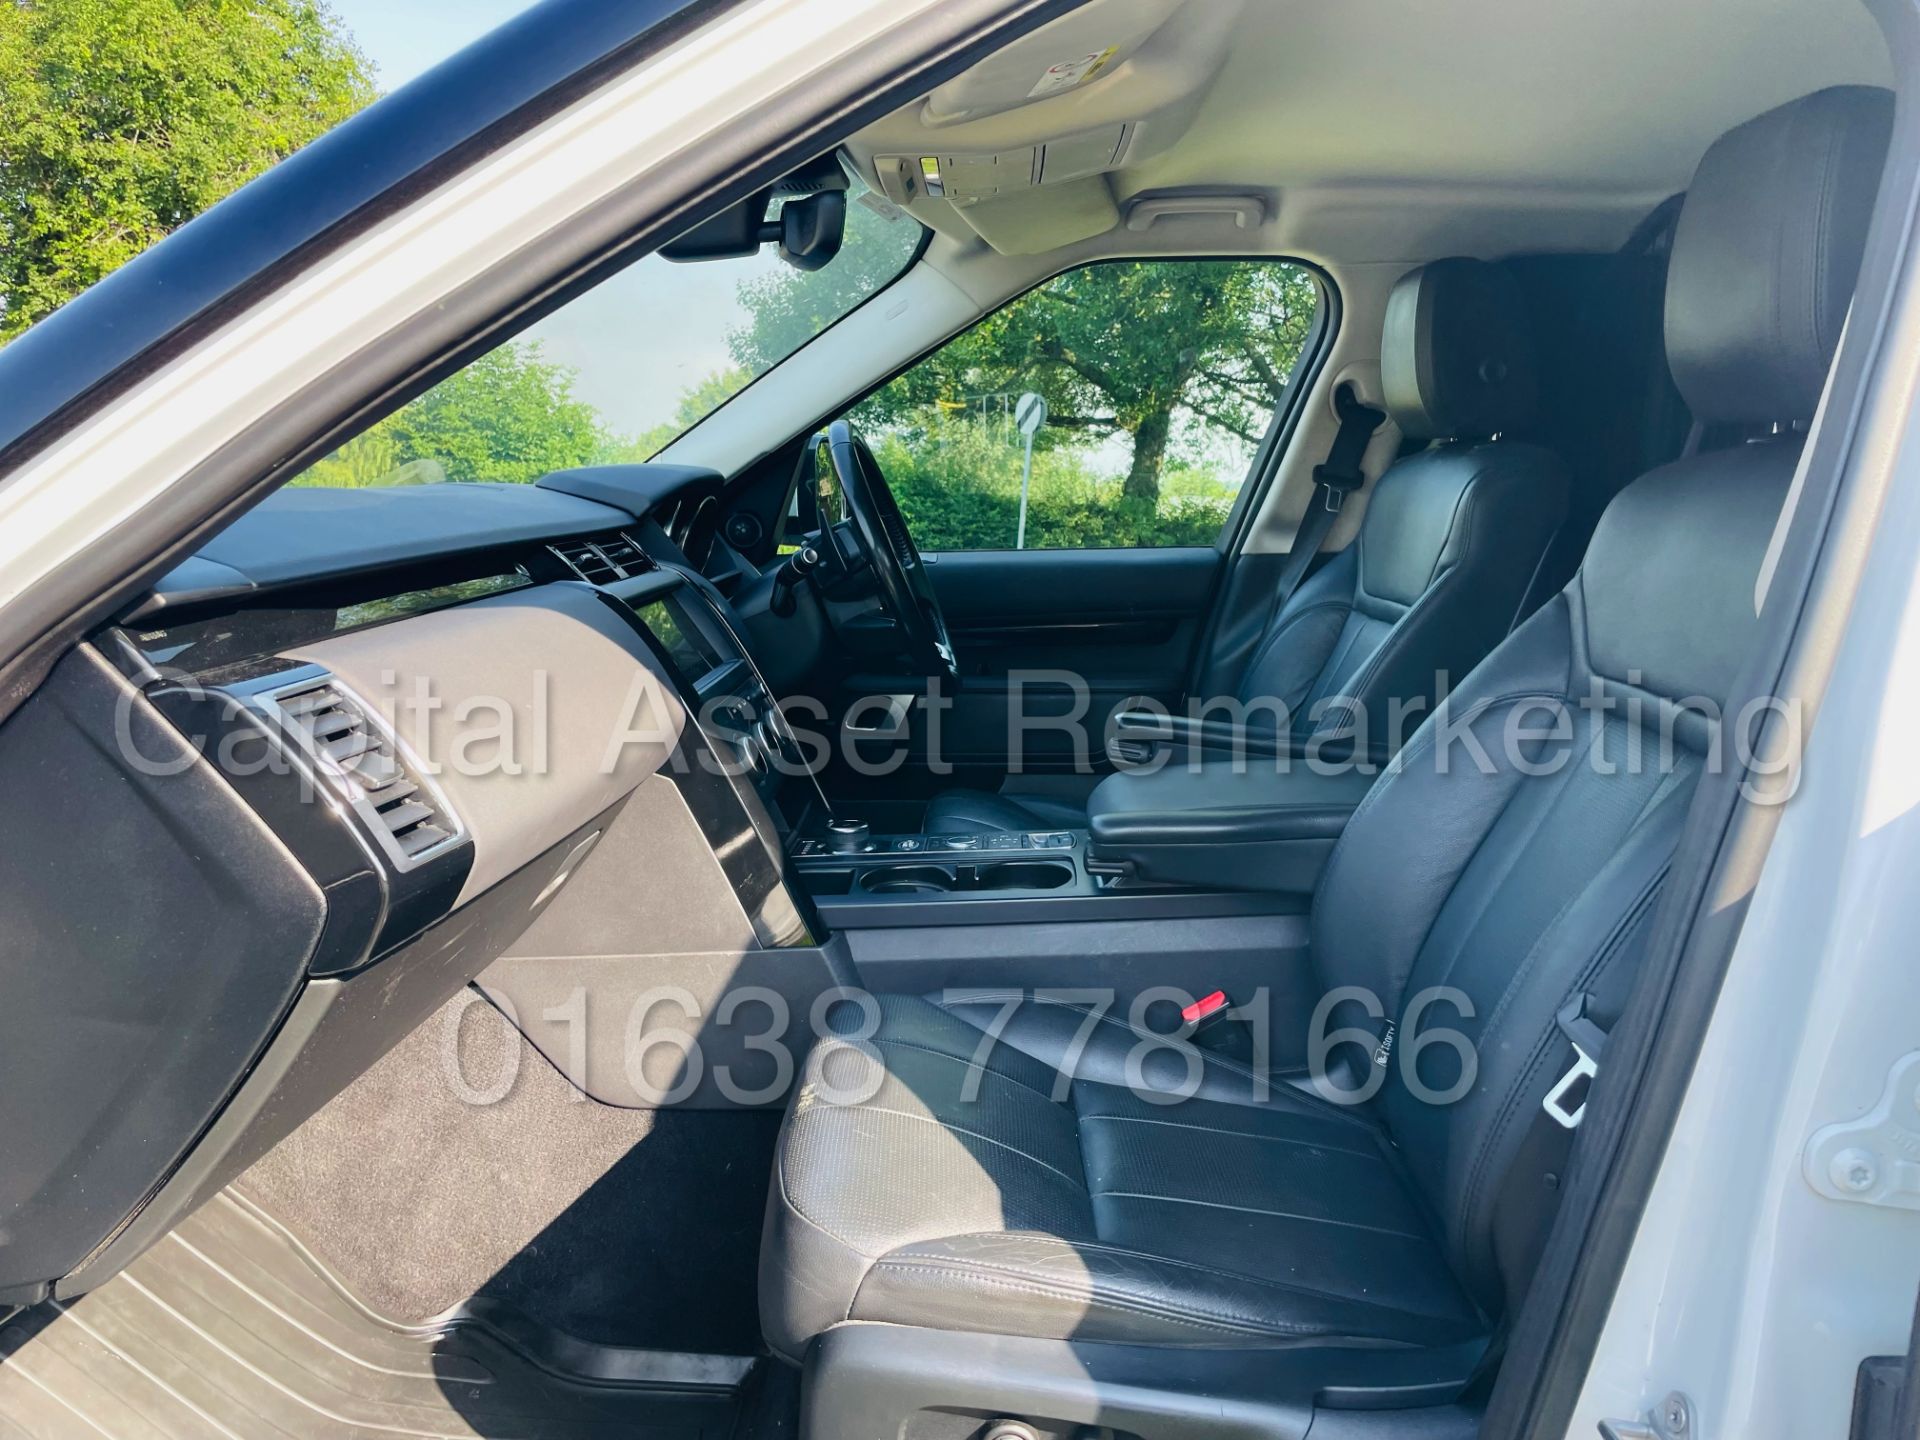 LAND ROVER DISCOVERY 5 *SE EDITION* SUV (2019 - EURO 6) '3.0 TD6 -306 BHP- 8 SPEED AUTO' *HUGE SPEC* - Image 25 of 47